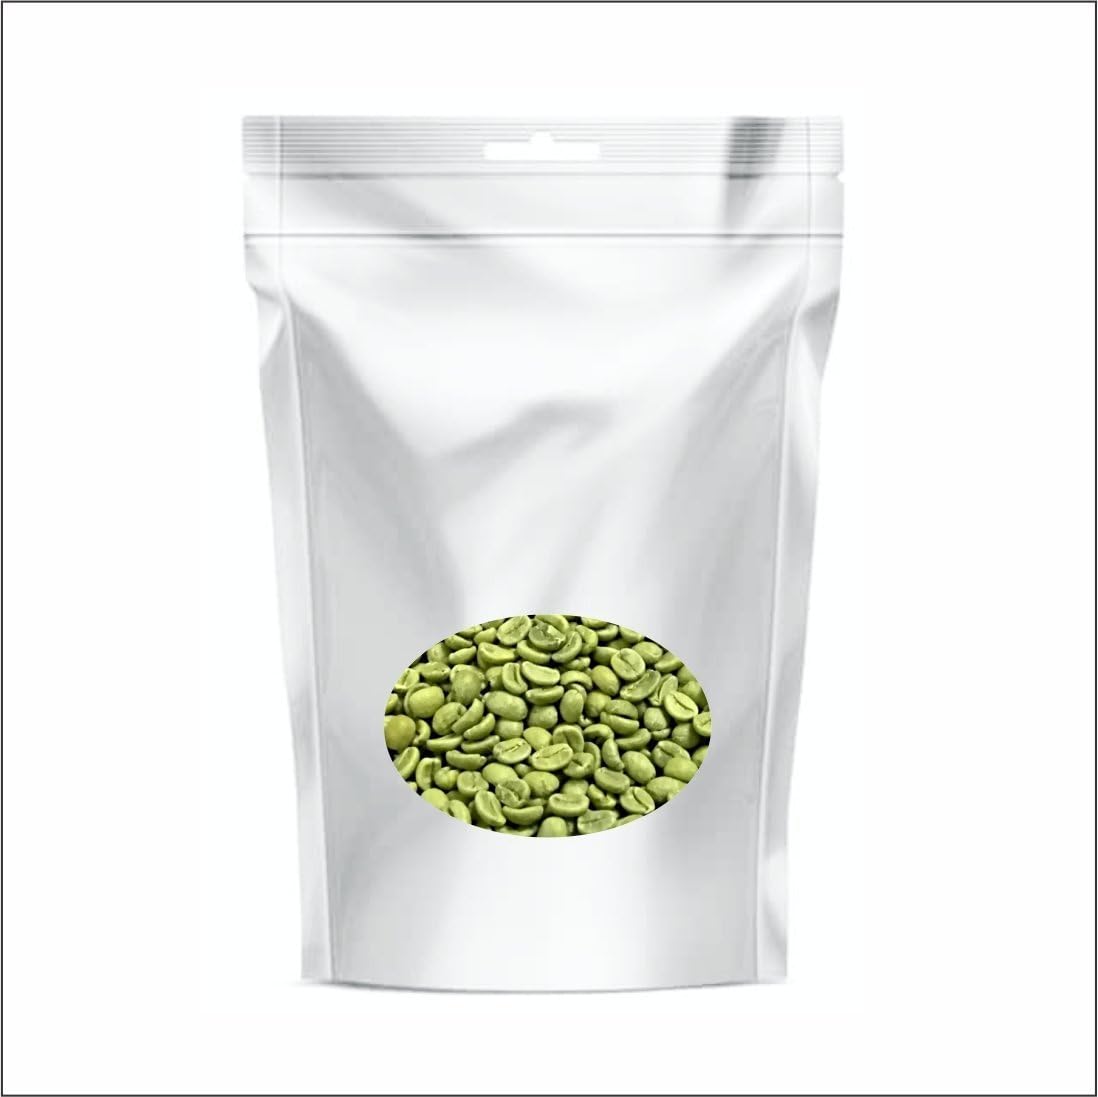 Zindagi Natural Green Coffee Beans Pouch - 100% Natural Green Coffee - Fat Free Health Drink (400 gm)